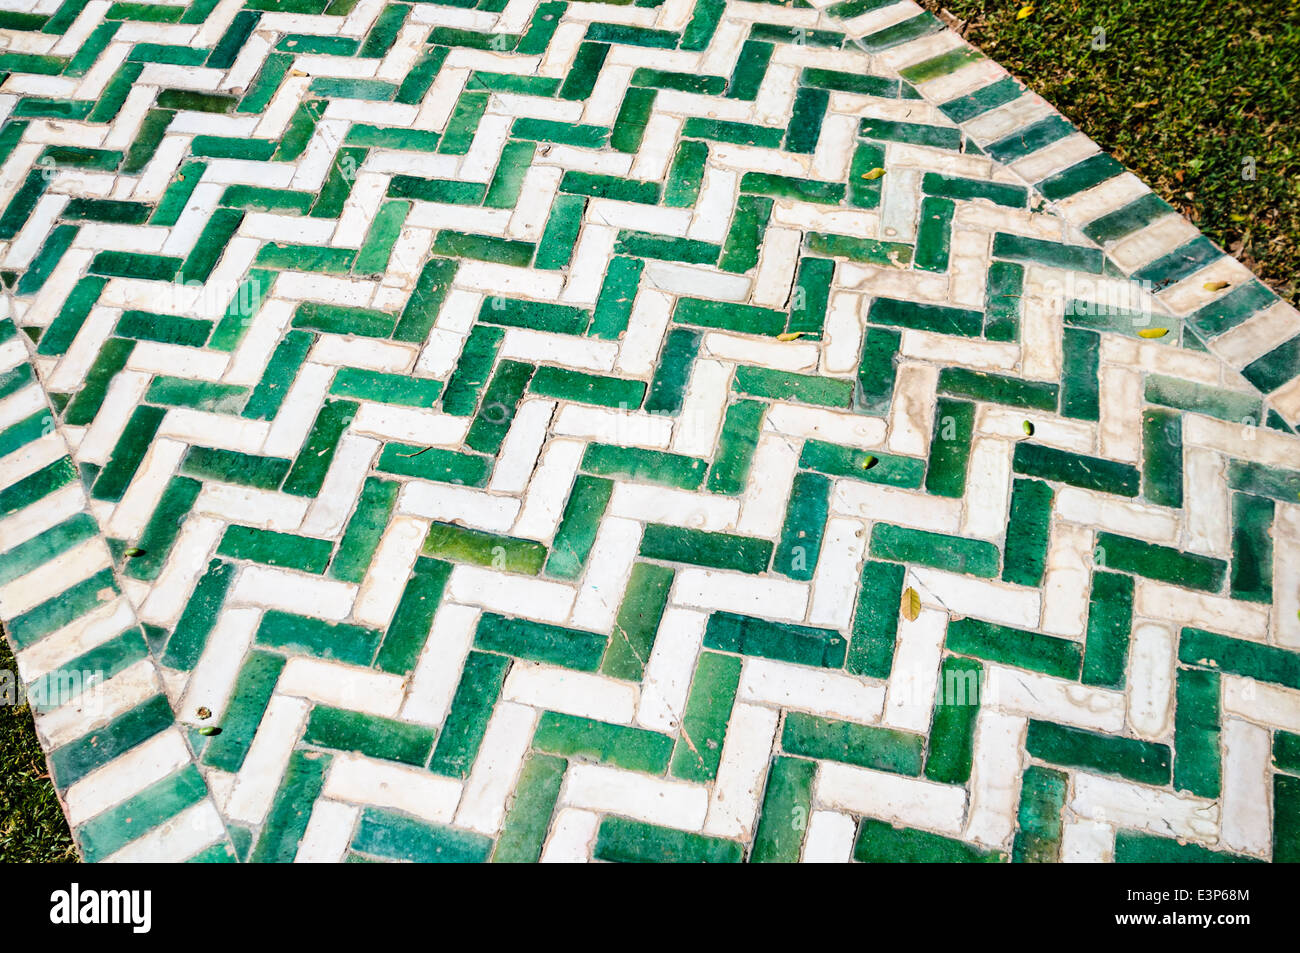 Garden path made from green and white rectangular ceramic tiles, laid in a herringbone pattern. Stock Photo